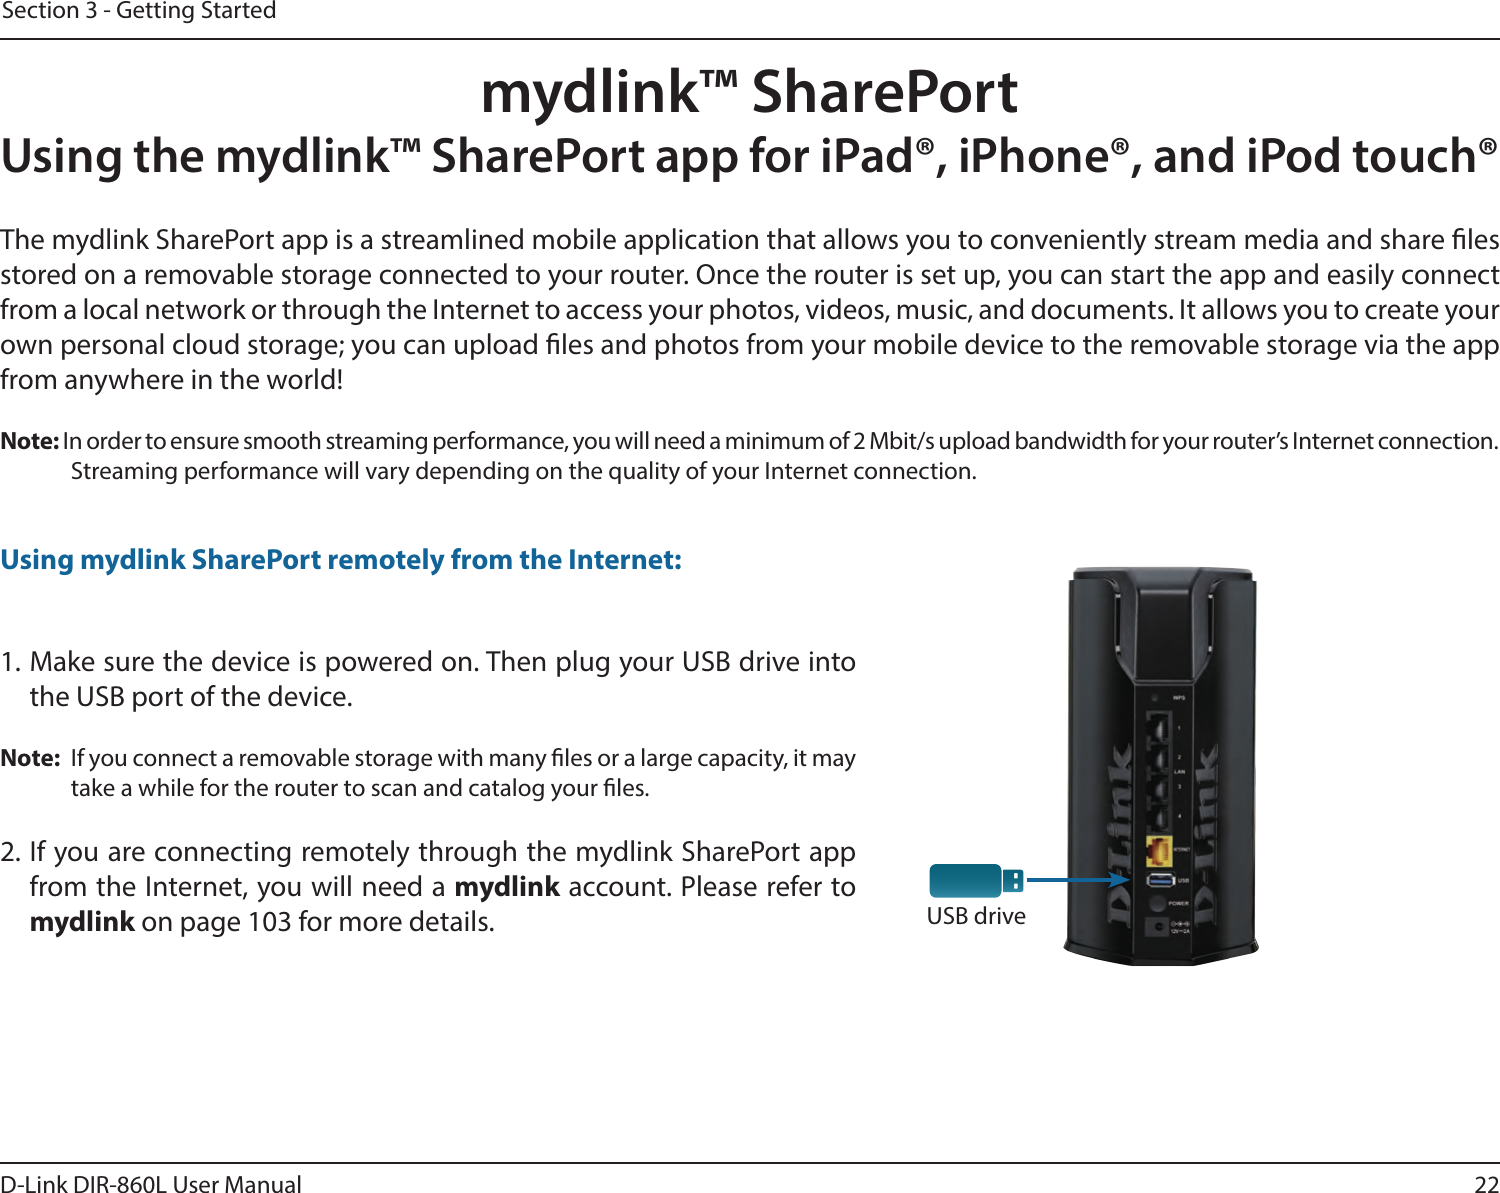 22D-Link DIR-860L User ManualSection 3 - Getting Startedmydlink™ SharePortUsing the mydlink™ SharePort app for iPad®, iPhone®, and iPod touch®USB driveThe mydlink SharePort app is a streamlined mobile application that allows you to conveniently stream media and share les stored on a removable storage connected to your router. Once the router is set up, you can start the app and easily connect from a local network or through the Internet to access your photos, videos, music, and documents. It allows you to create your own personal cloud storage; you can upload les and photos from your mobile device to the removable storage via the app from anywhere in the world!Note: In order to ensure smooth streaming performance, you will need a minimum of 2 Mbit/s upload bandwidth for your router’s Internet connection. Streaming performance will vary depending on the quality of your Internet connection.1. Make sure the device is powered on. Then plug your USB drive into the USB port of the device.Note:  If you connect a removable storage with many les or a large capacity, it may take a while for the router to scan and catalog your les.2. If you are connecting remotely through the mydlink SharePort app from the Internet, you will need a mydlink account. Please refer to  mydlink on page 103 for more details.Using mydlink SharePort remotely from the Internet: